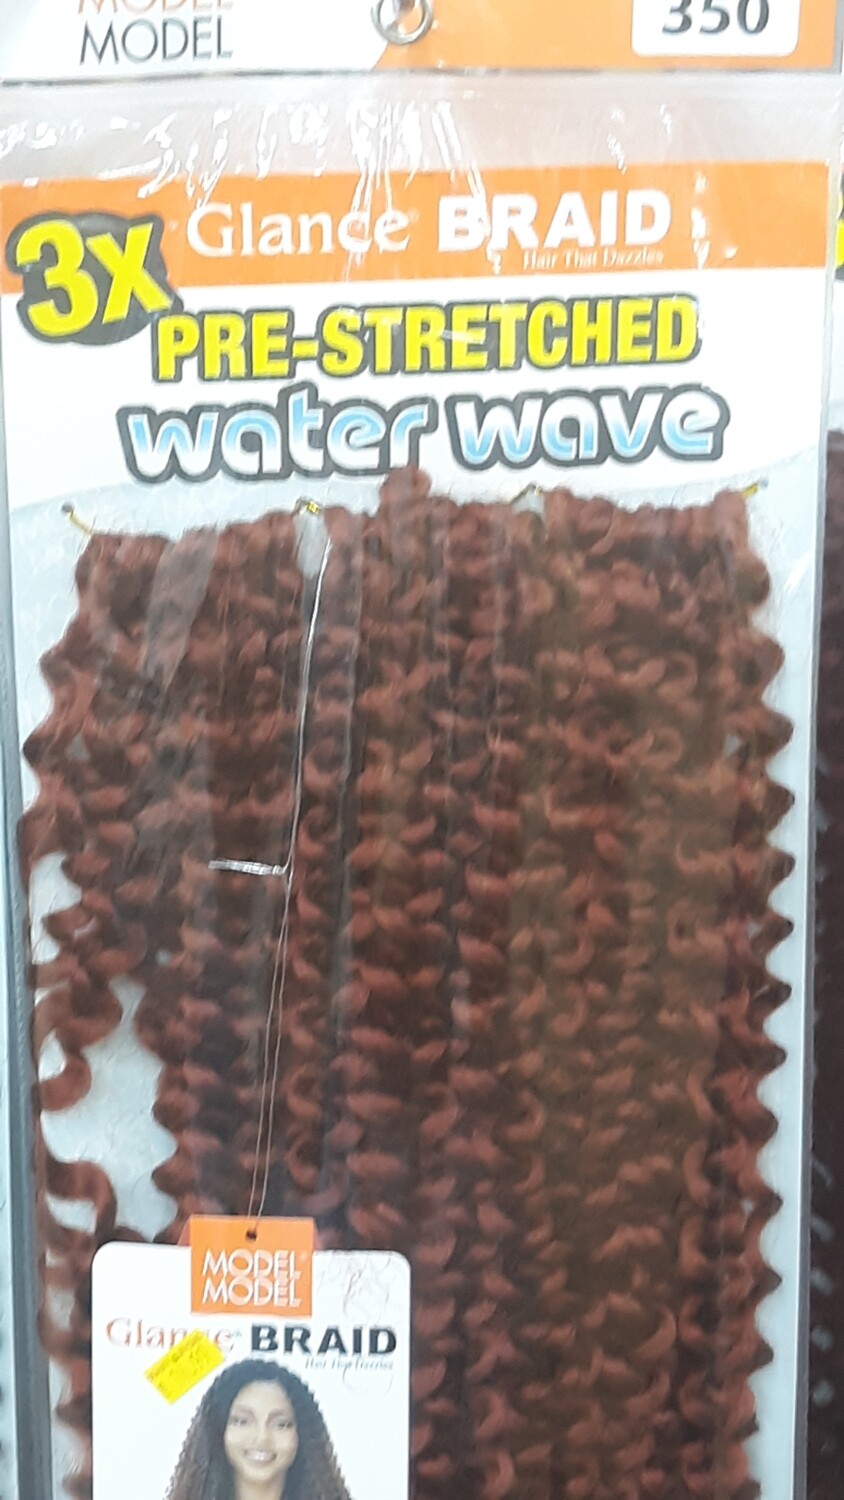 Glance Braid Pre-Stretched Water Wave 18" (350)